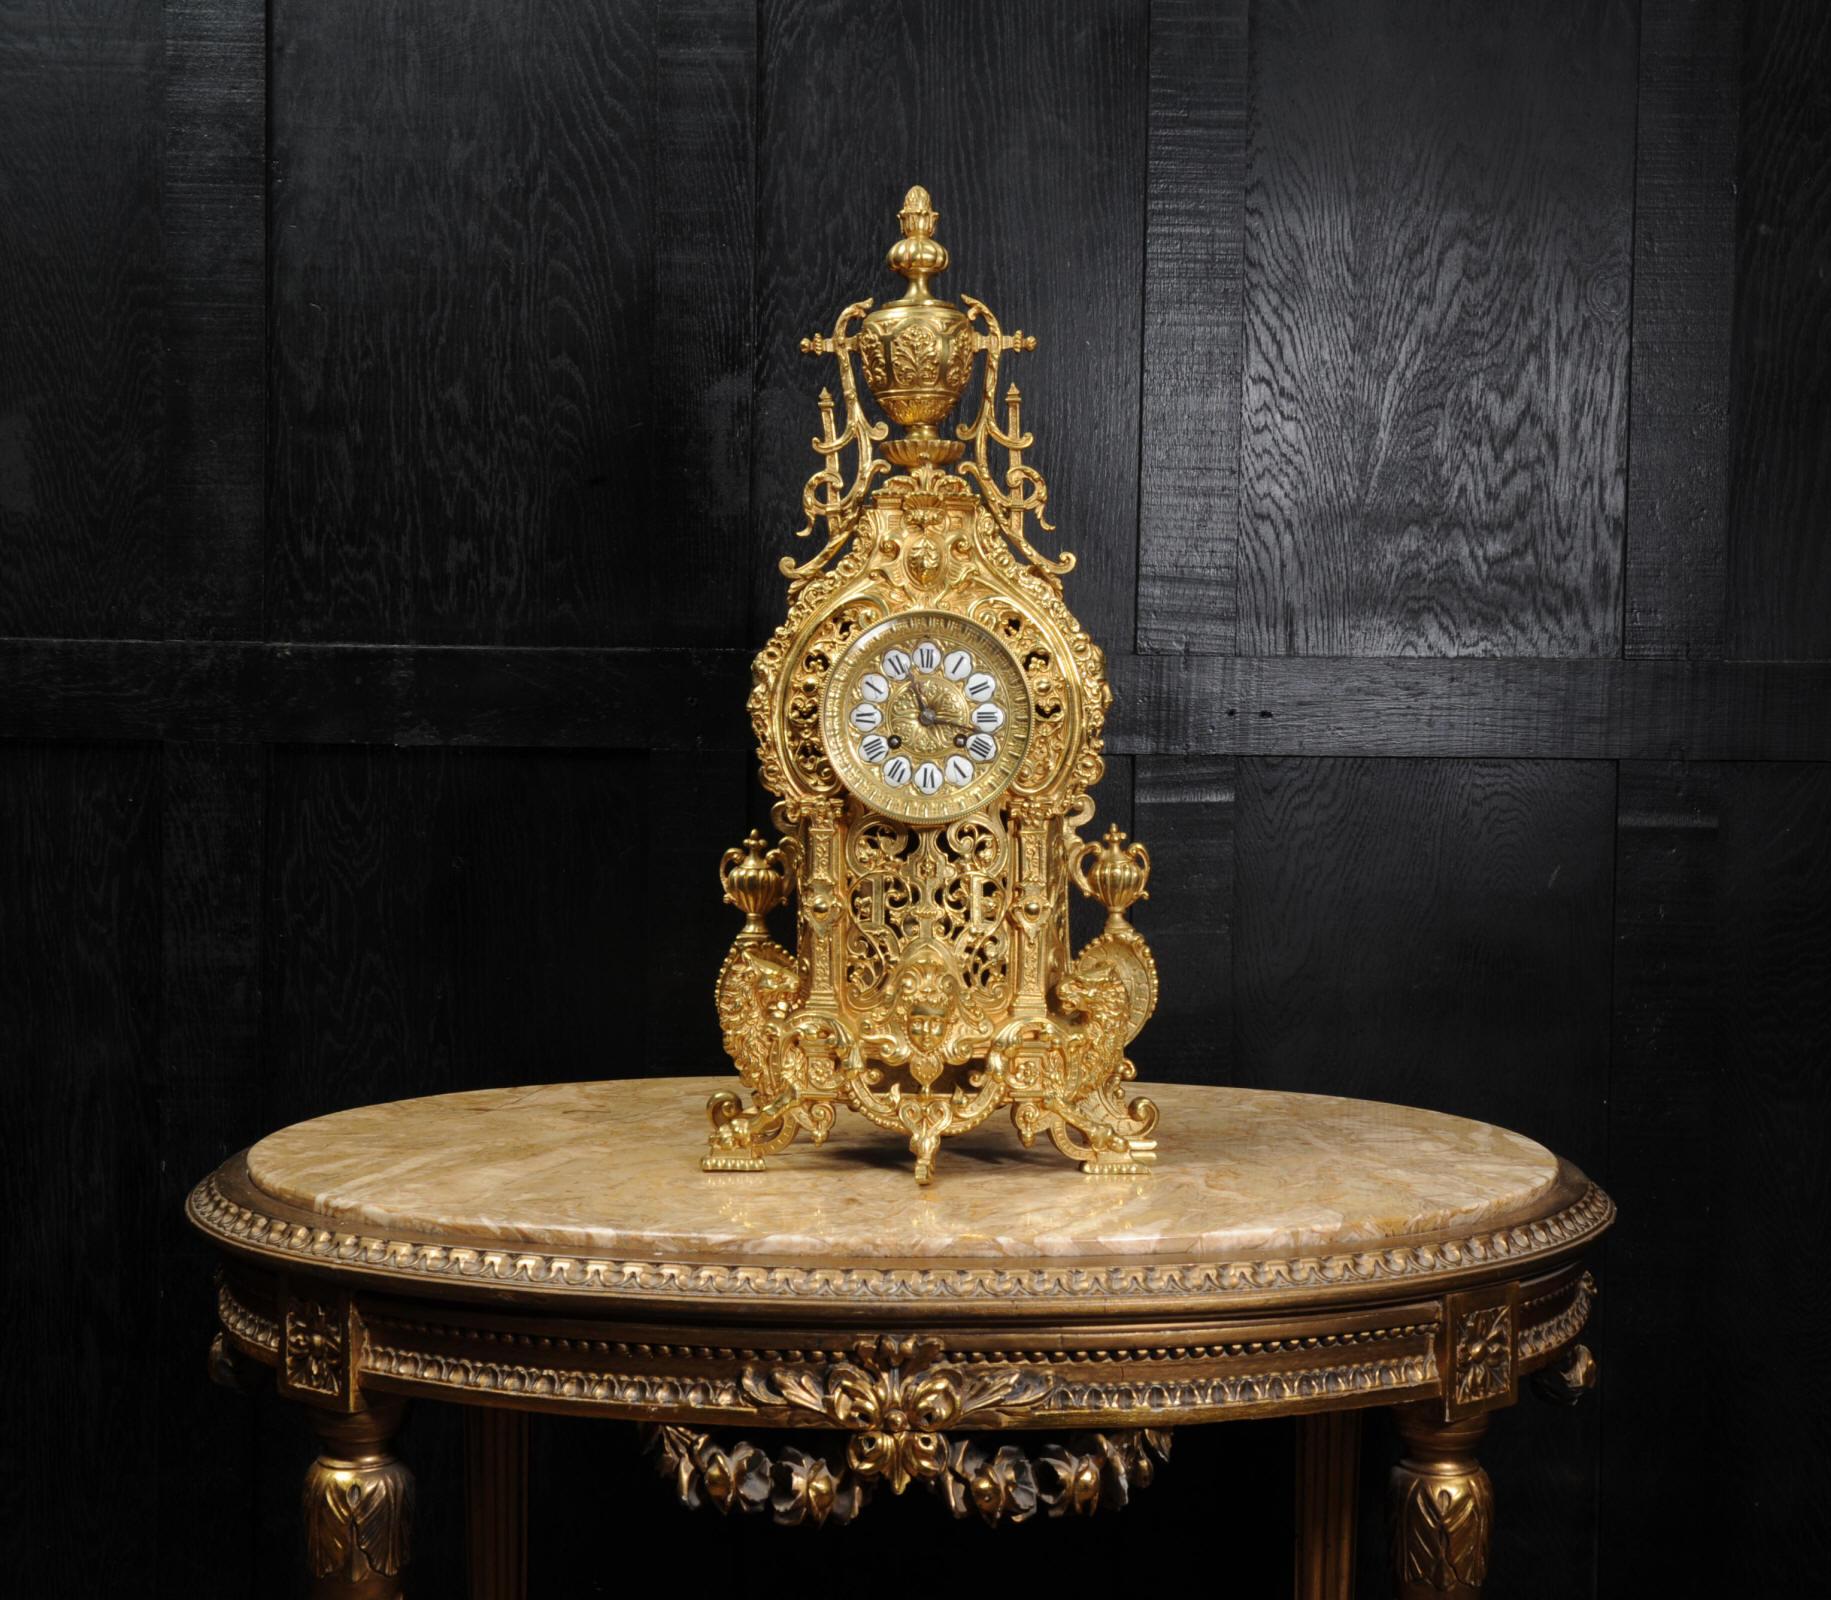 A large and impressive original antique French gilt bronze clock, circa 1880. It is Baroque in style, mythical creatures support the clock on a stylized sea of scrolls. Elaborate twirling foliage forms a fretted front to allow a glimpse of the